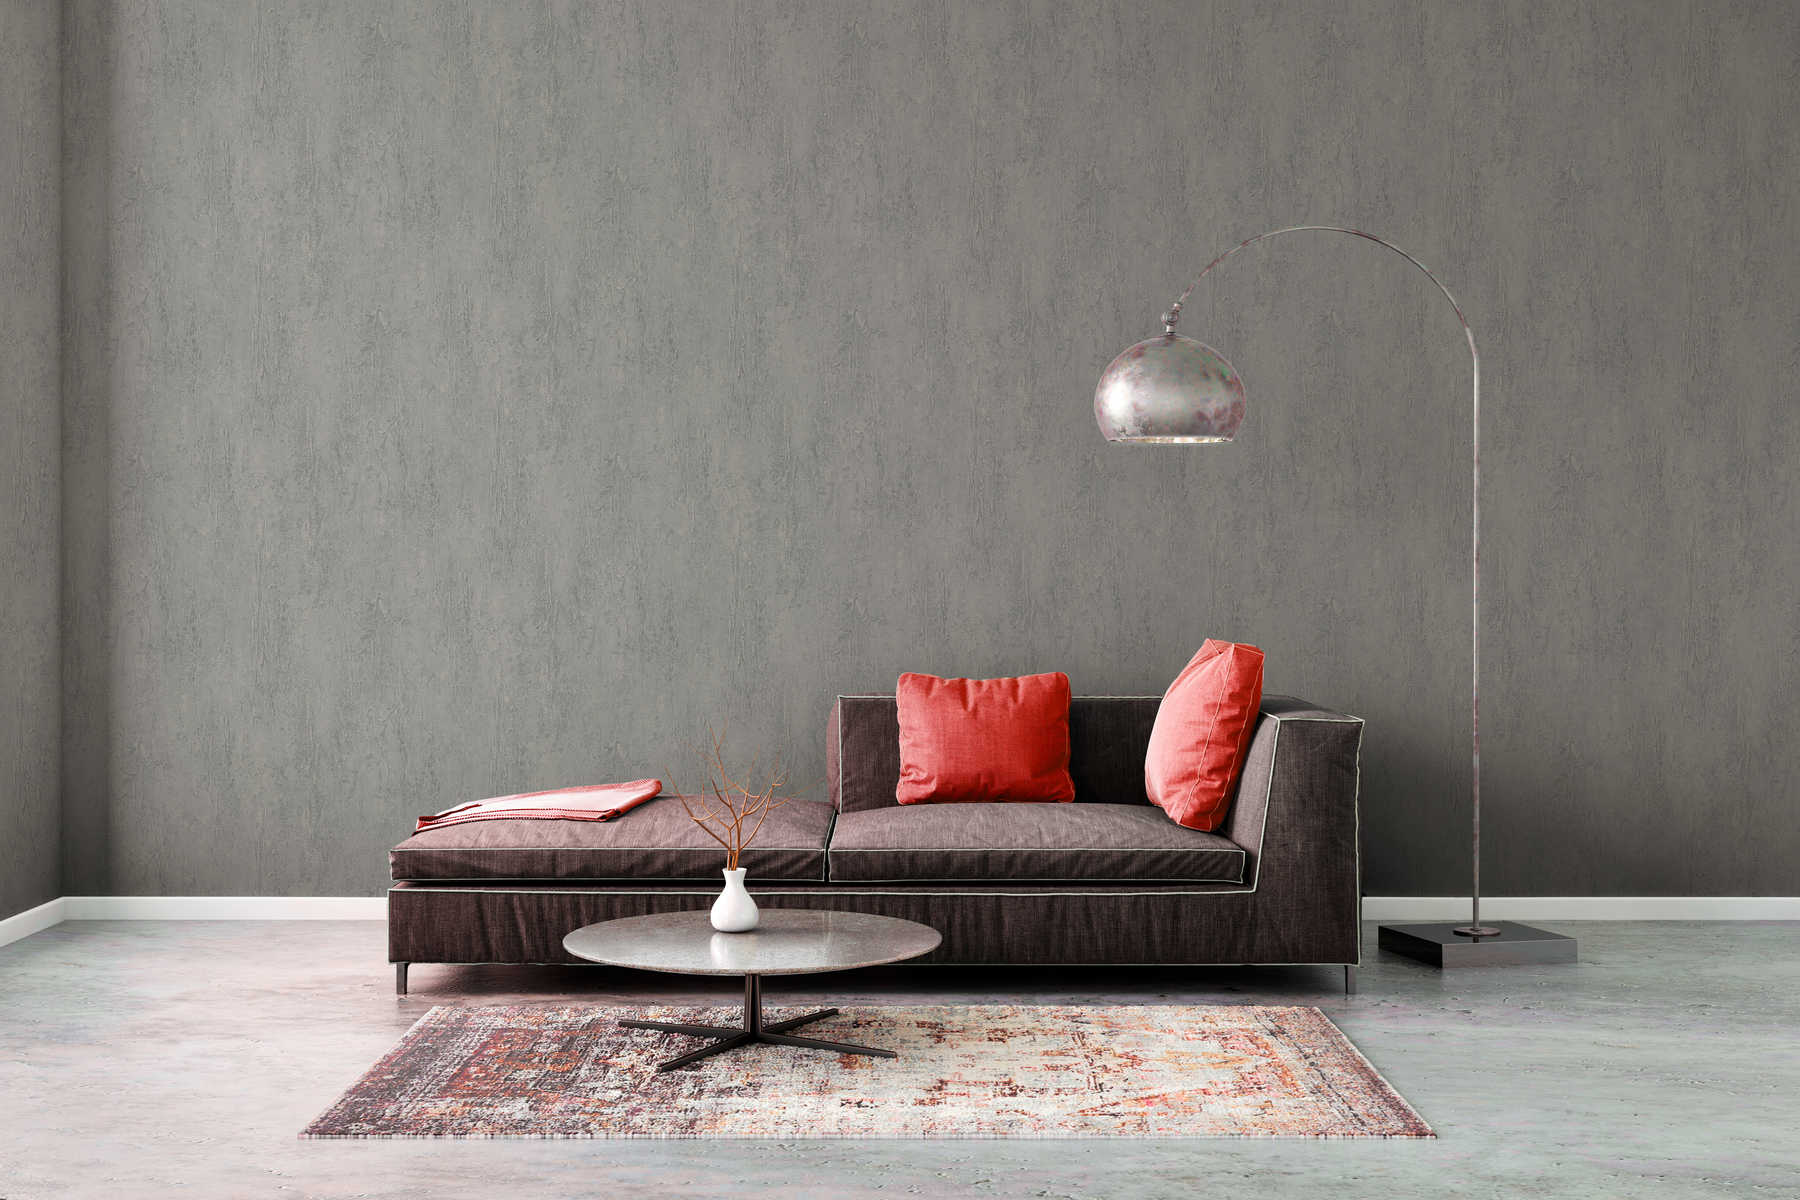             Non-woven wallpaper with natural textured pattern and concrete look - grey
        